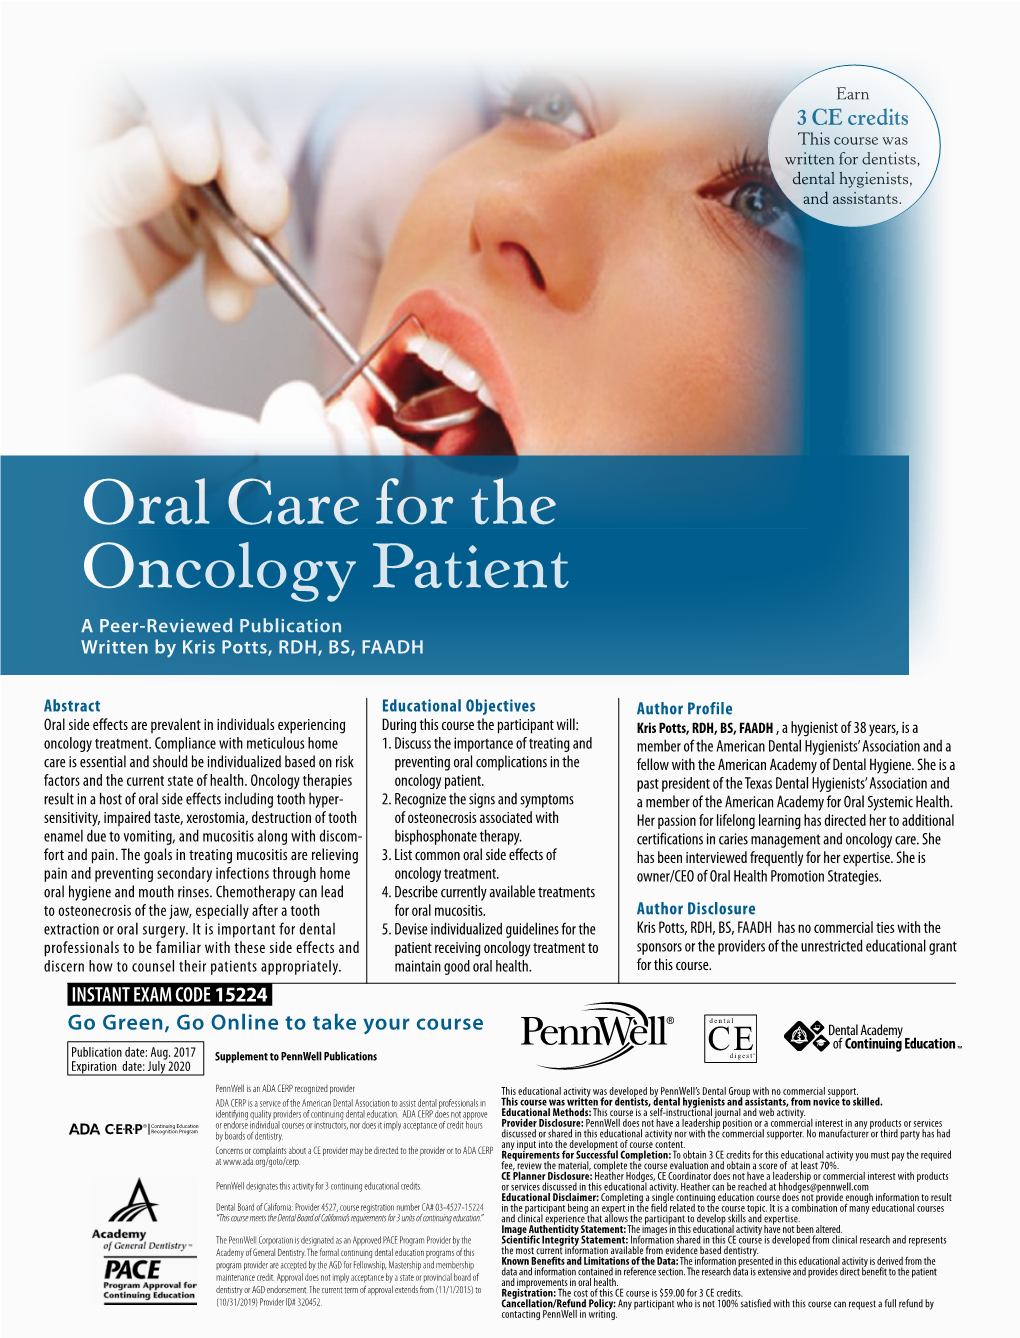 Oral Care for the Oncology Patient a Peer-Reviewed Publication Written by Kris Potts, RDH, BS, FAADH